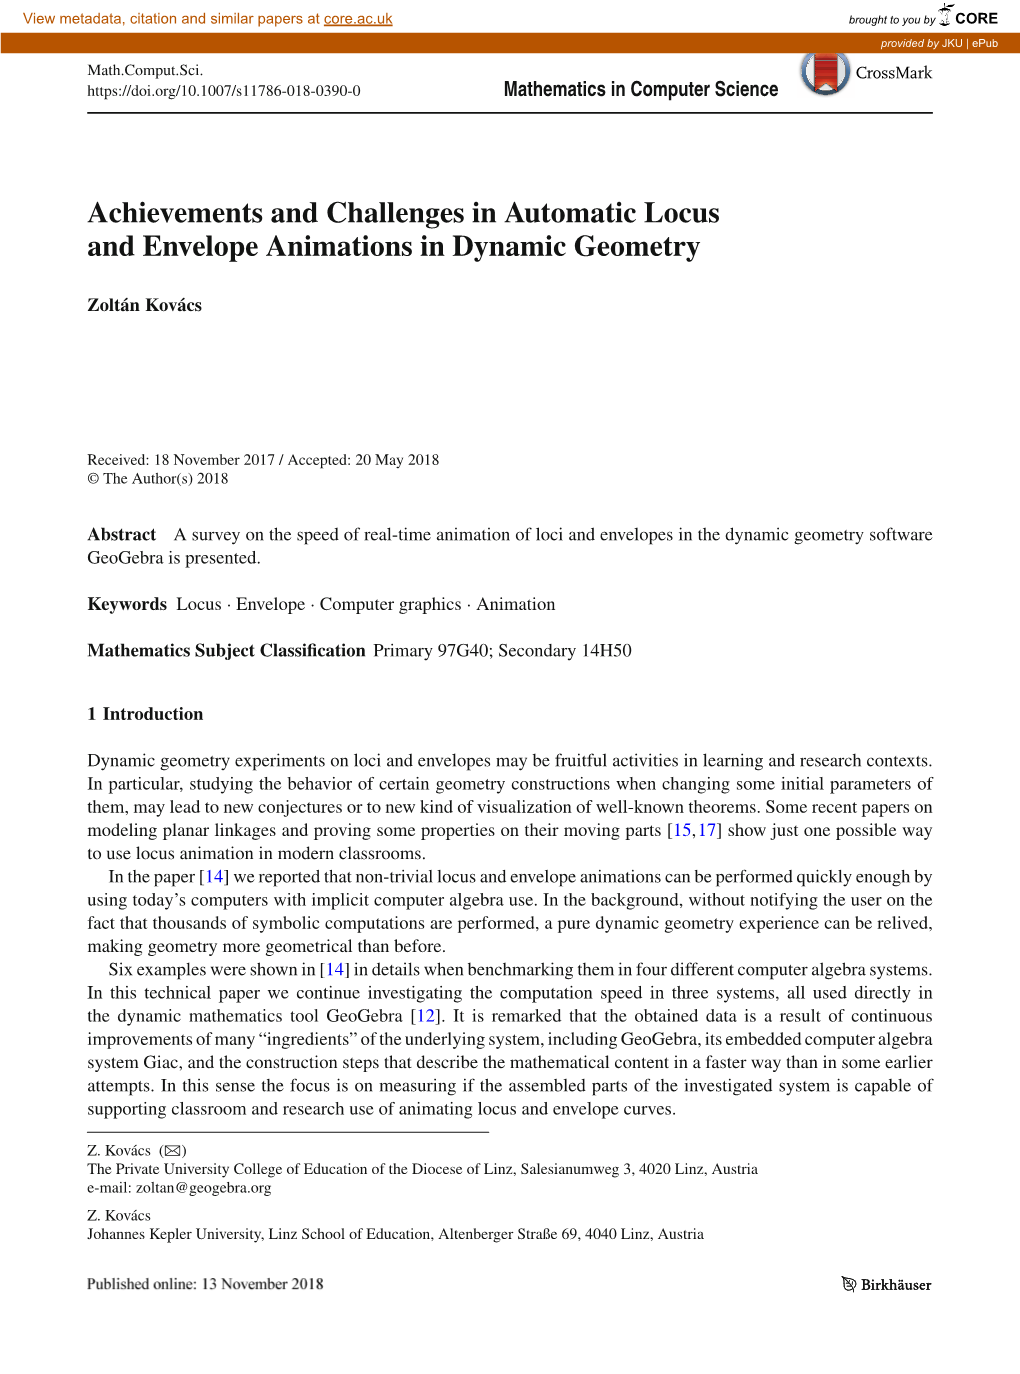 Achievements and Challenges in Automatic Locus and Envelope Animations in Dynamic Geometry